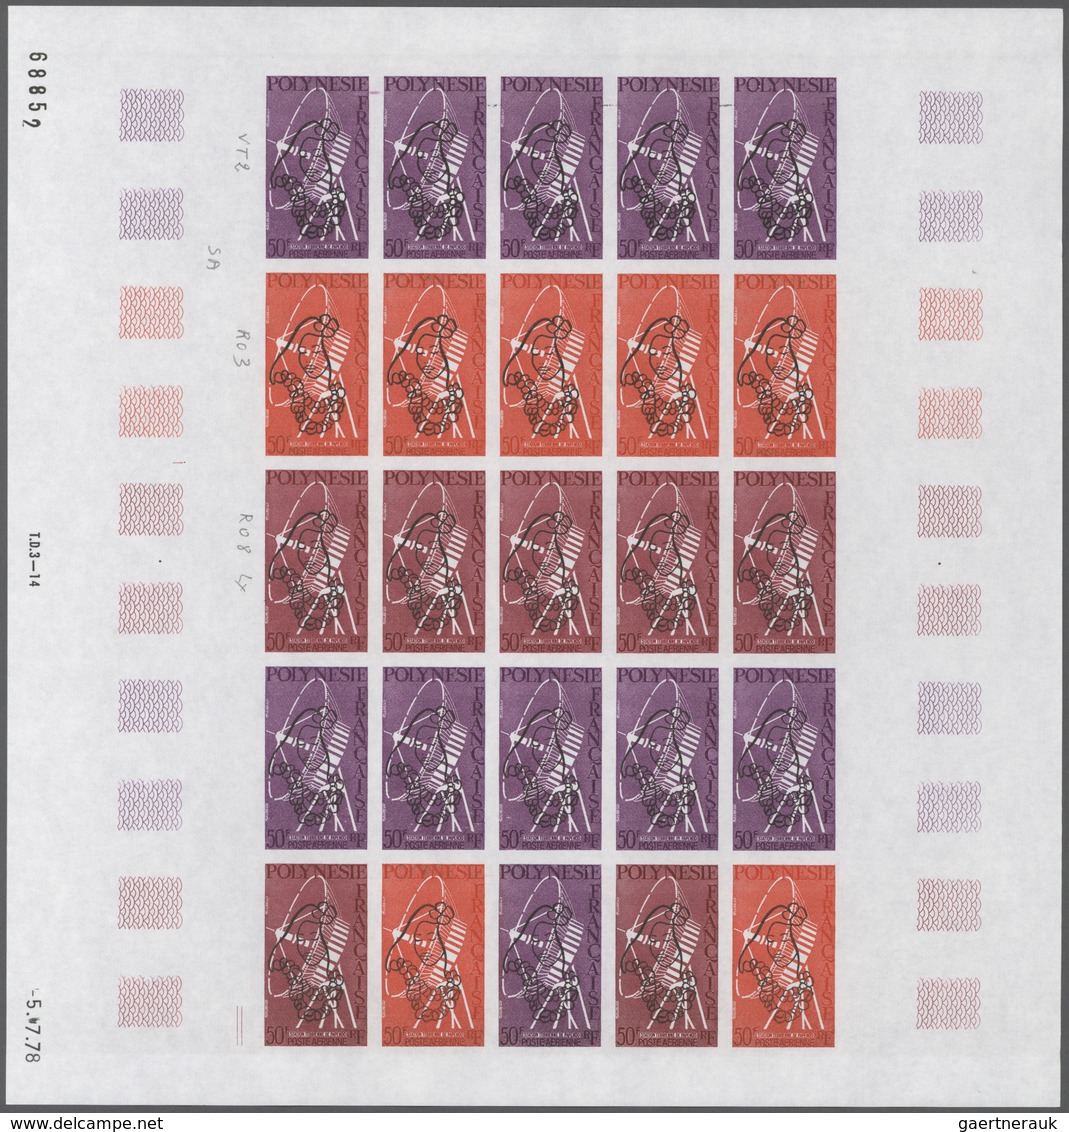 Frankreich: 1961/1979, France and area, IMPERFORATE COLOUR PROOFS, MNH assortment of 33 complete she